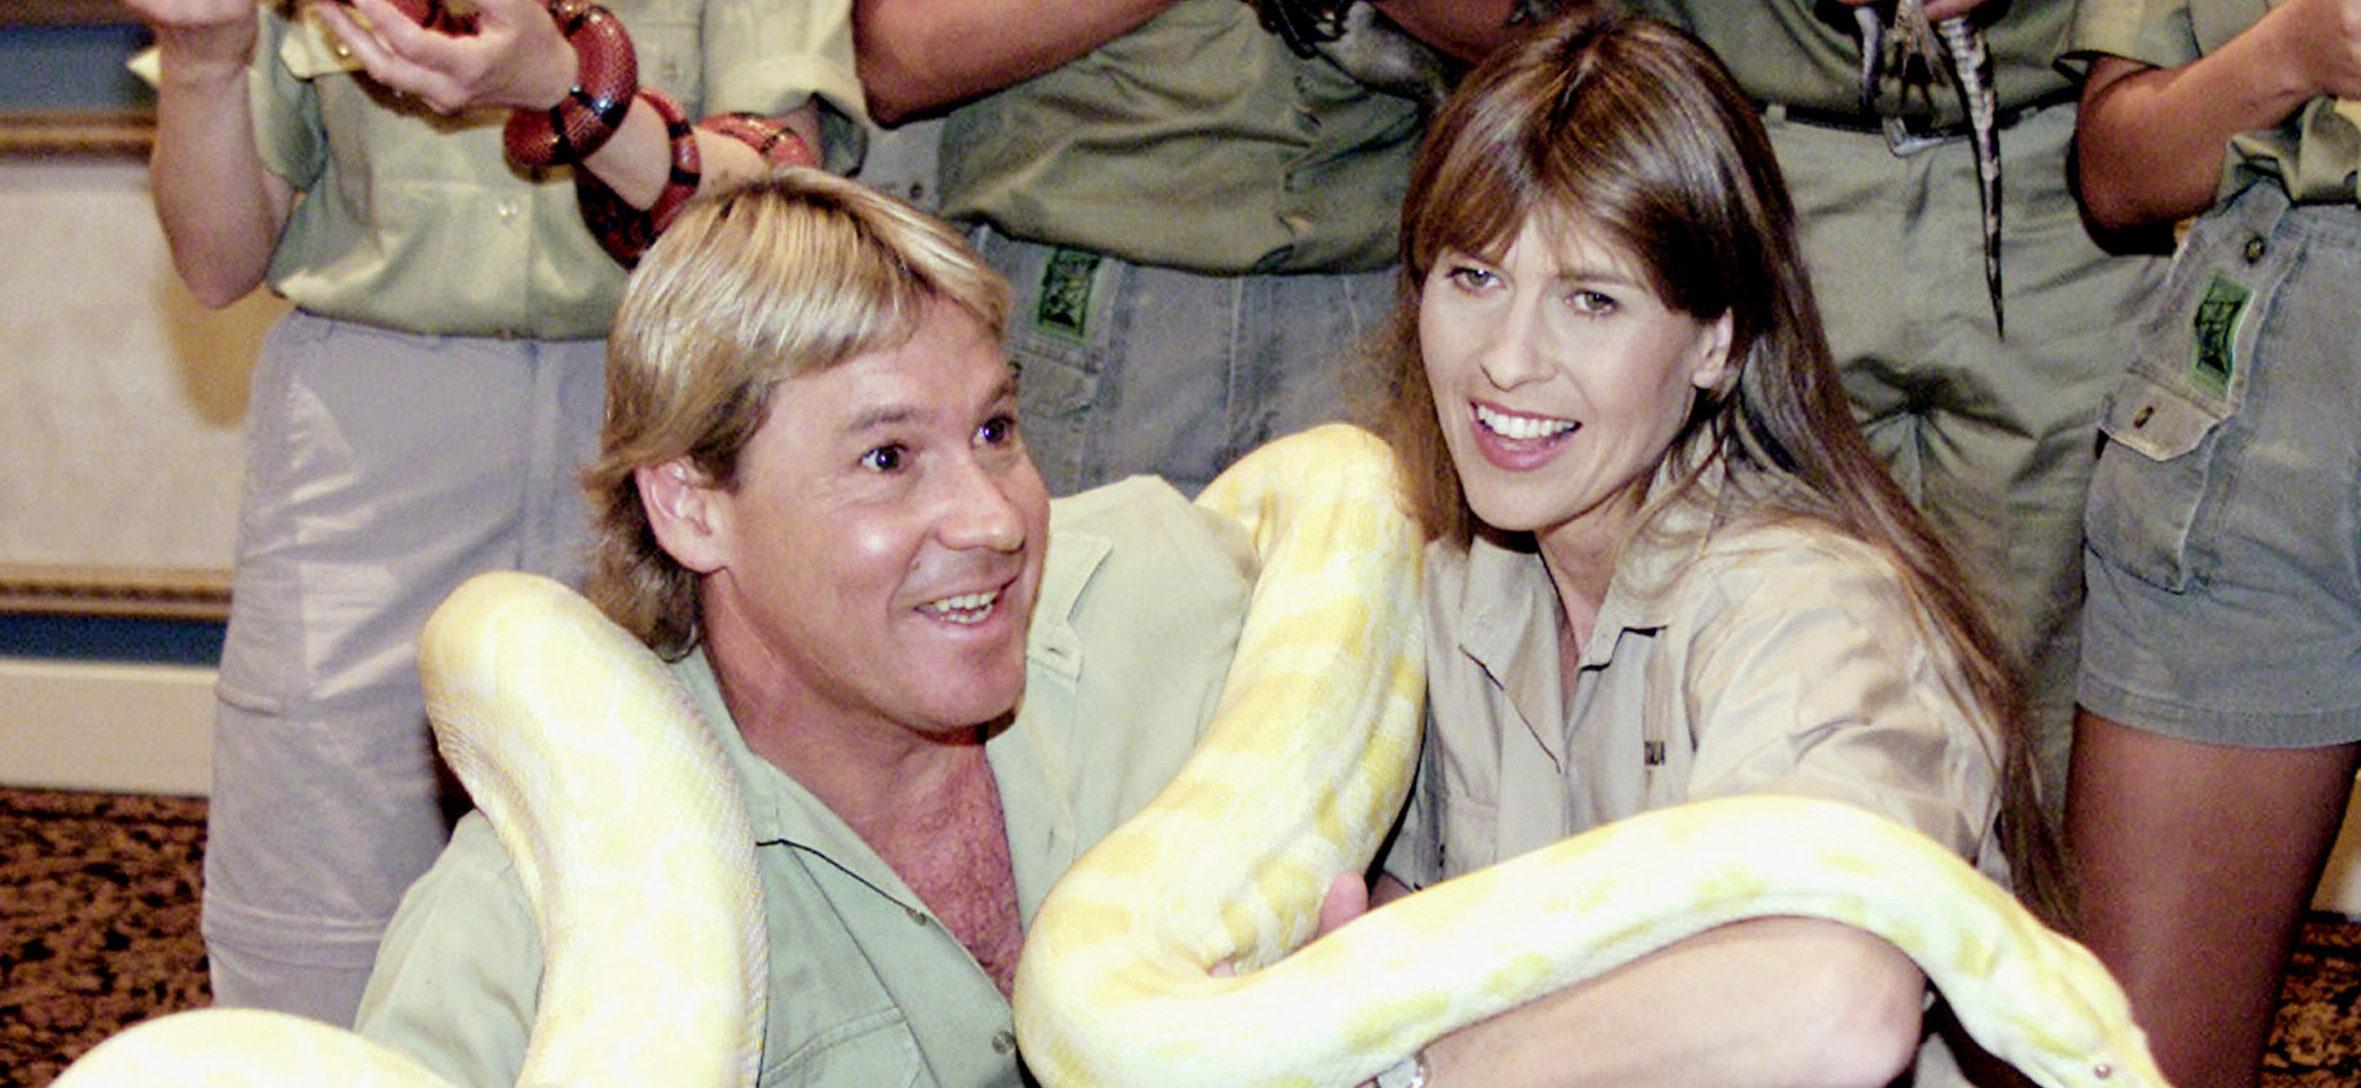 Steve Irwin and his wife Terri demonstrate a 16 foot Anaconda snake that will be used in their forthcoming movie "The Crocodile Hunter Collision Course" announced at ShoWest in Las Vegas